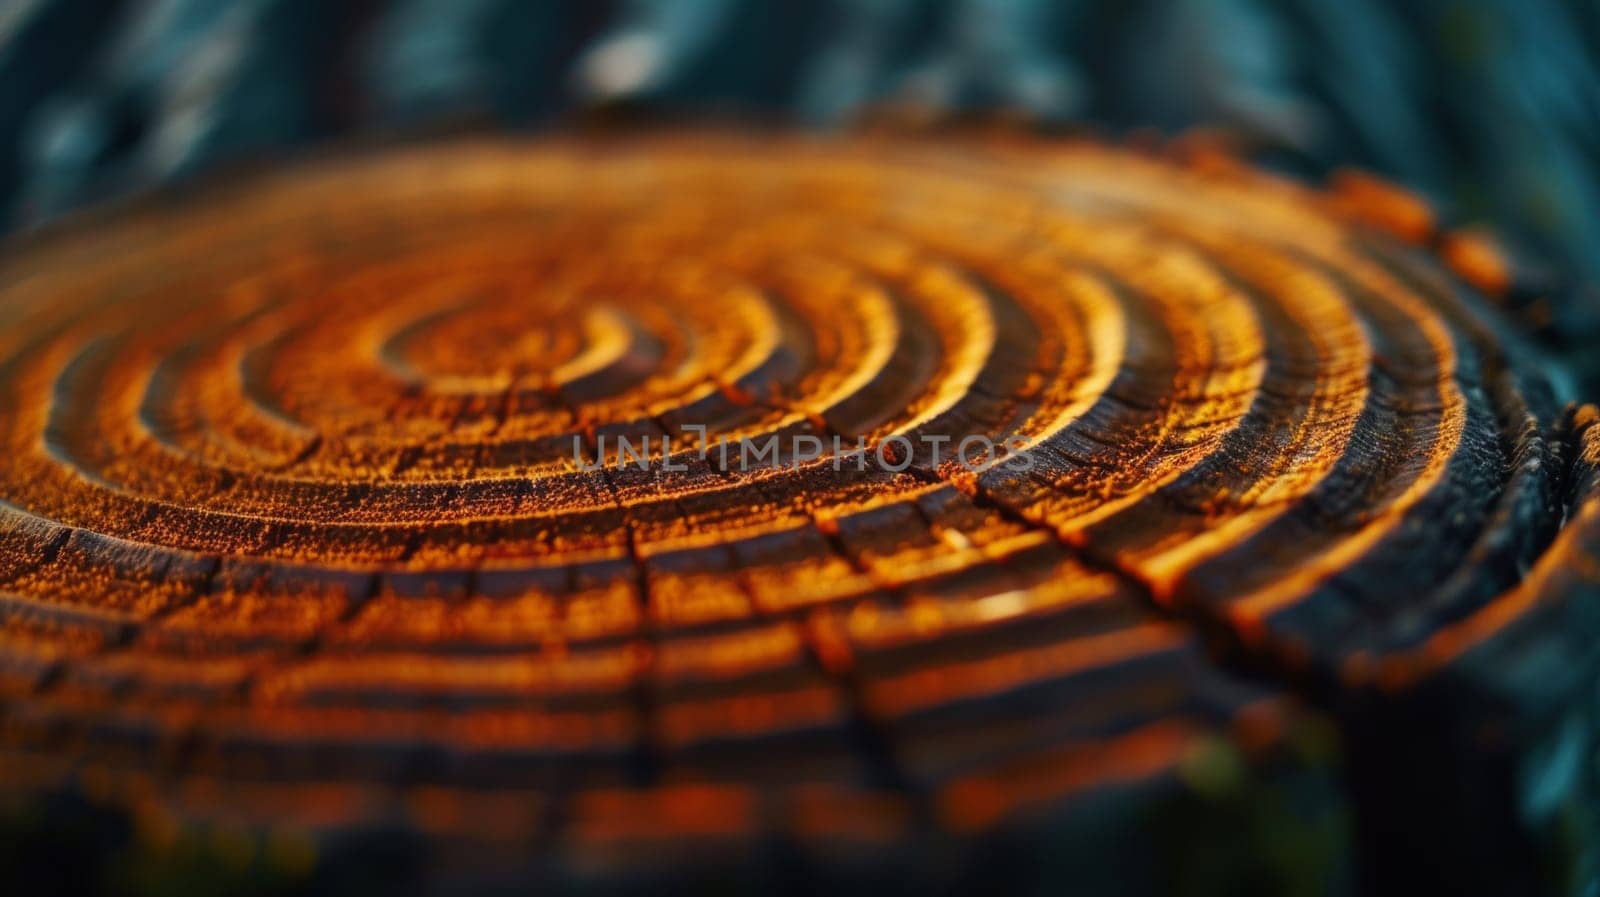 A close up of a tree stump with rings on it